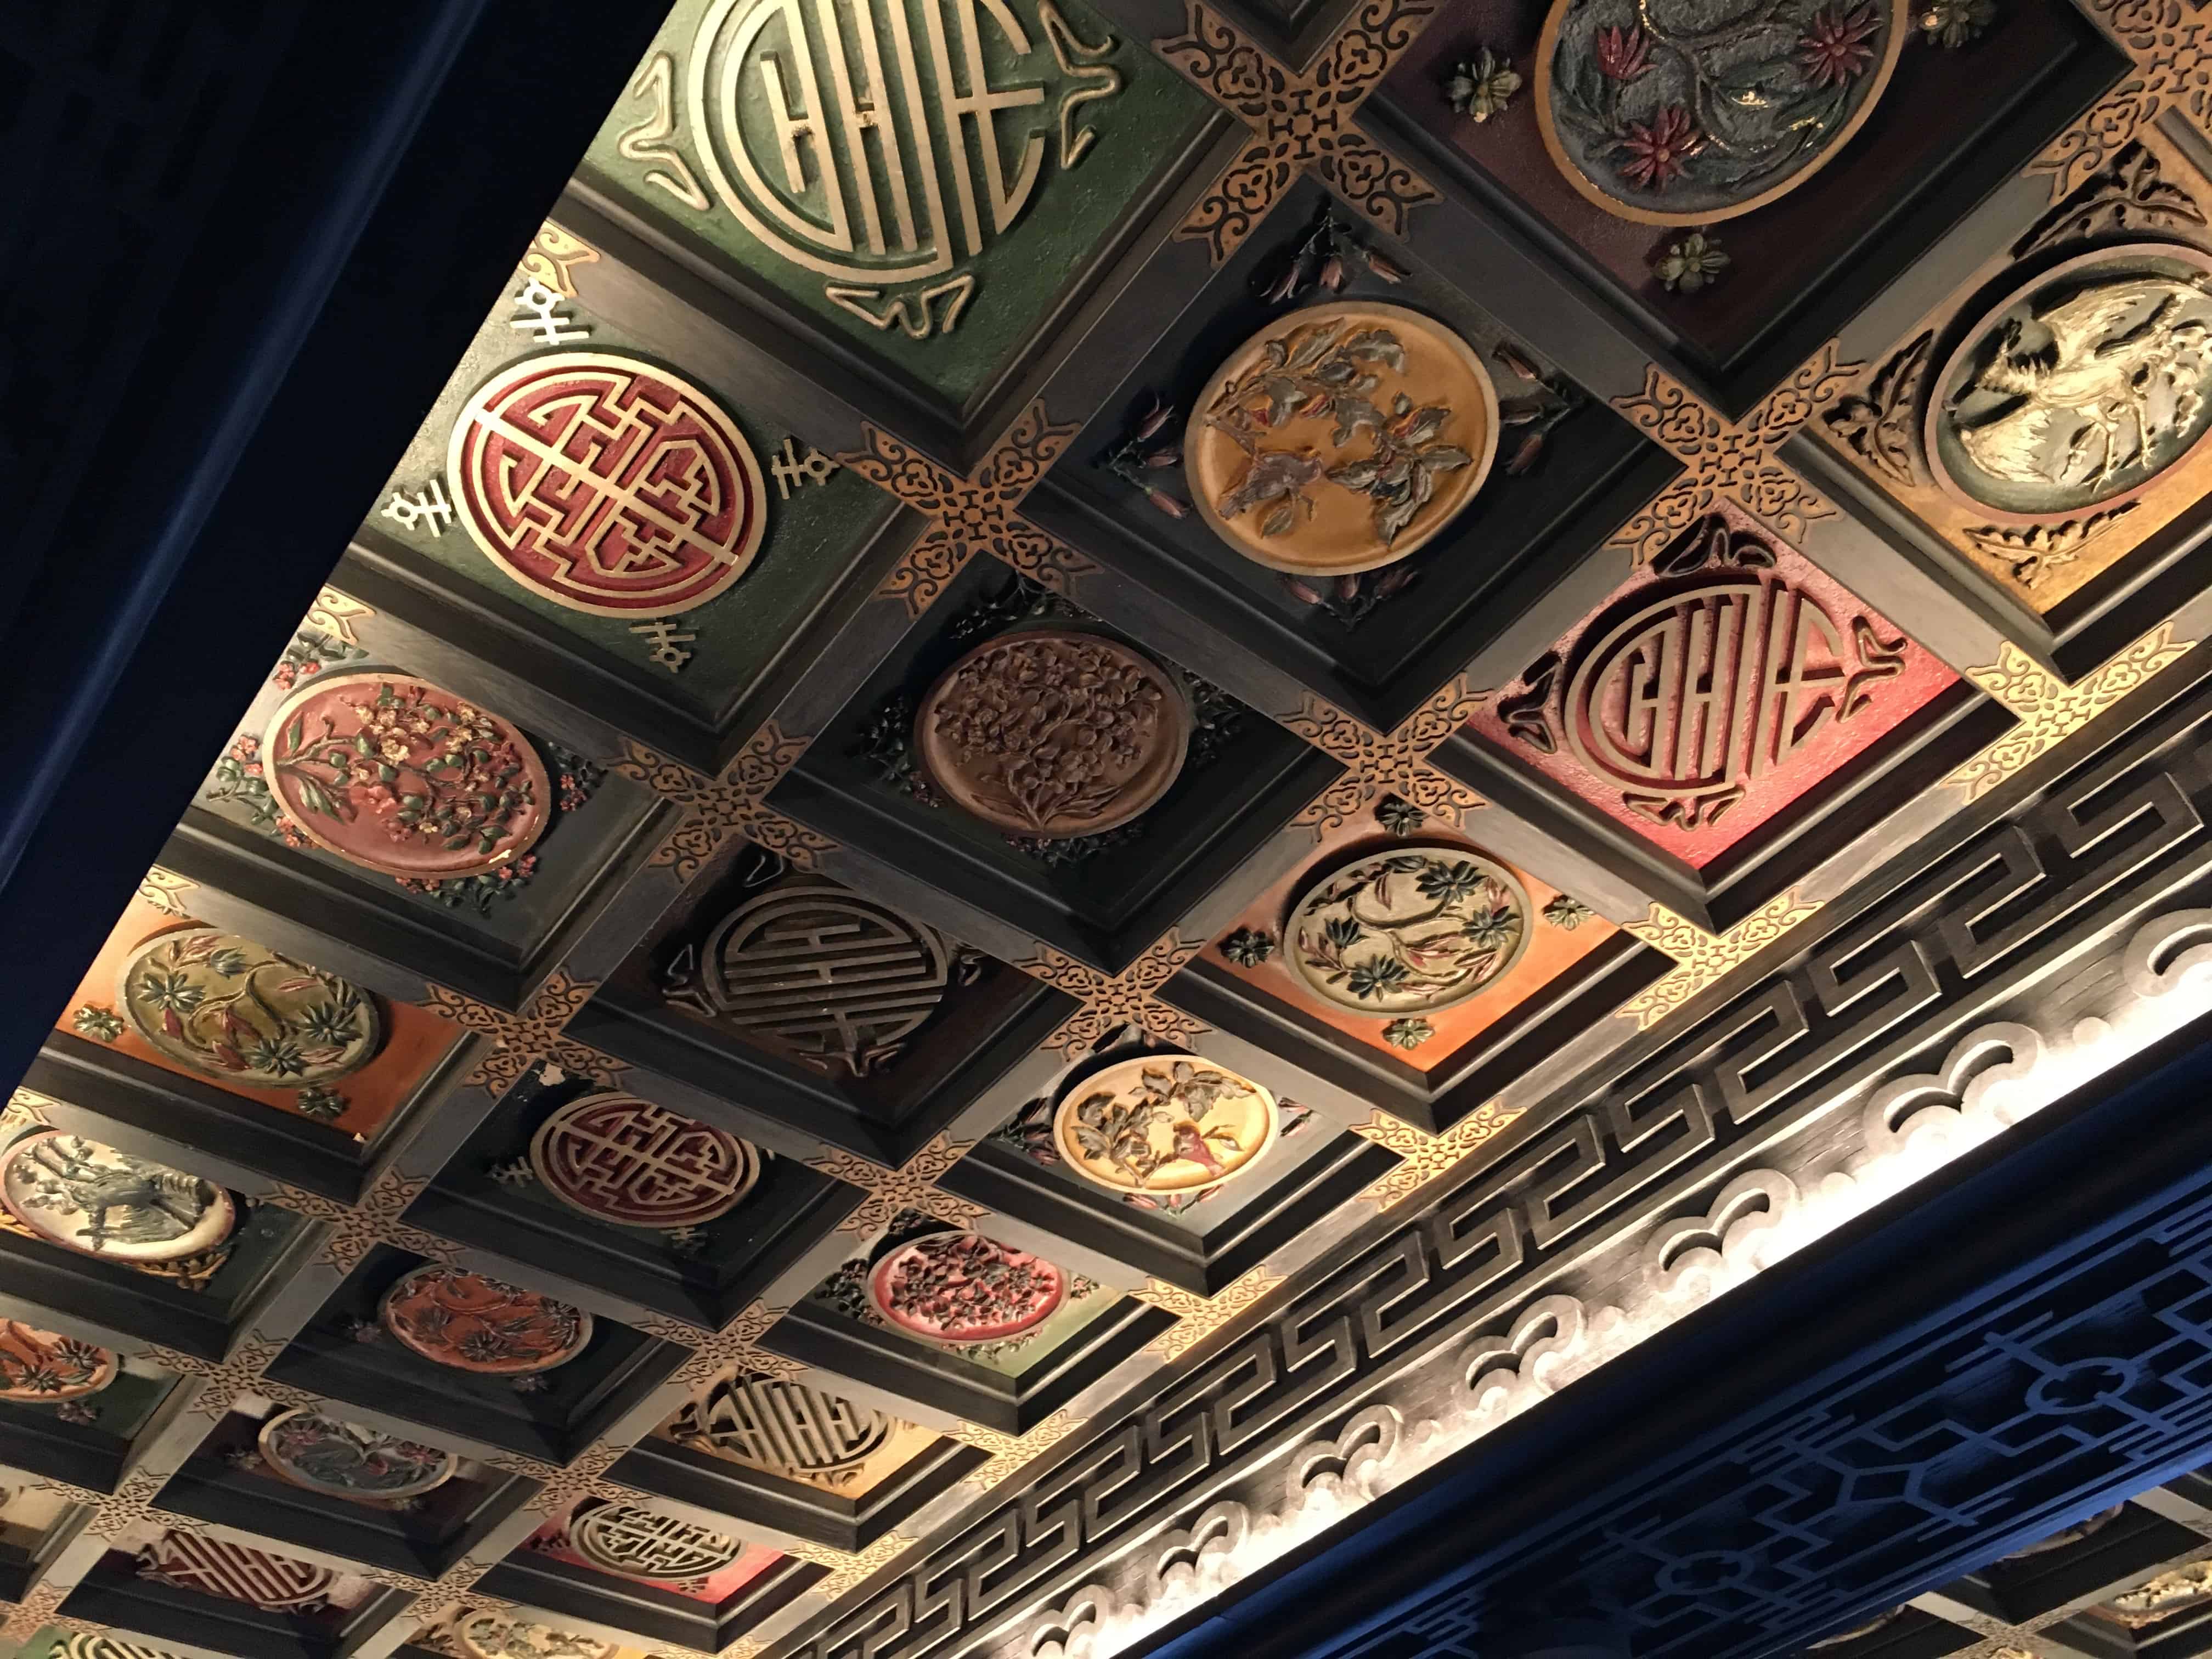 Ceiling of the Chinese Room at the Smith Tower in Seattle, Washington